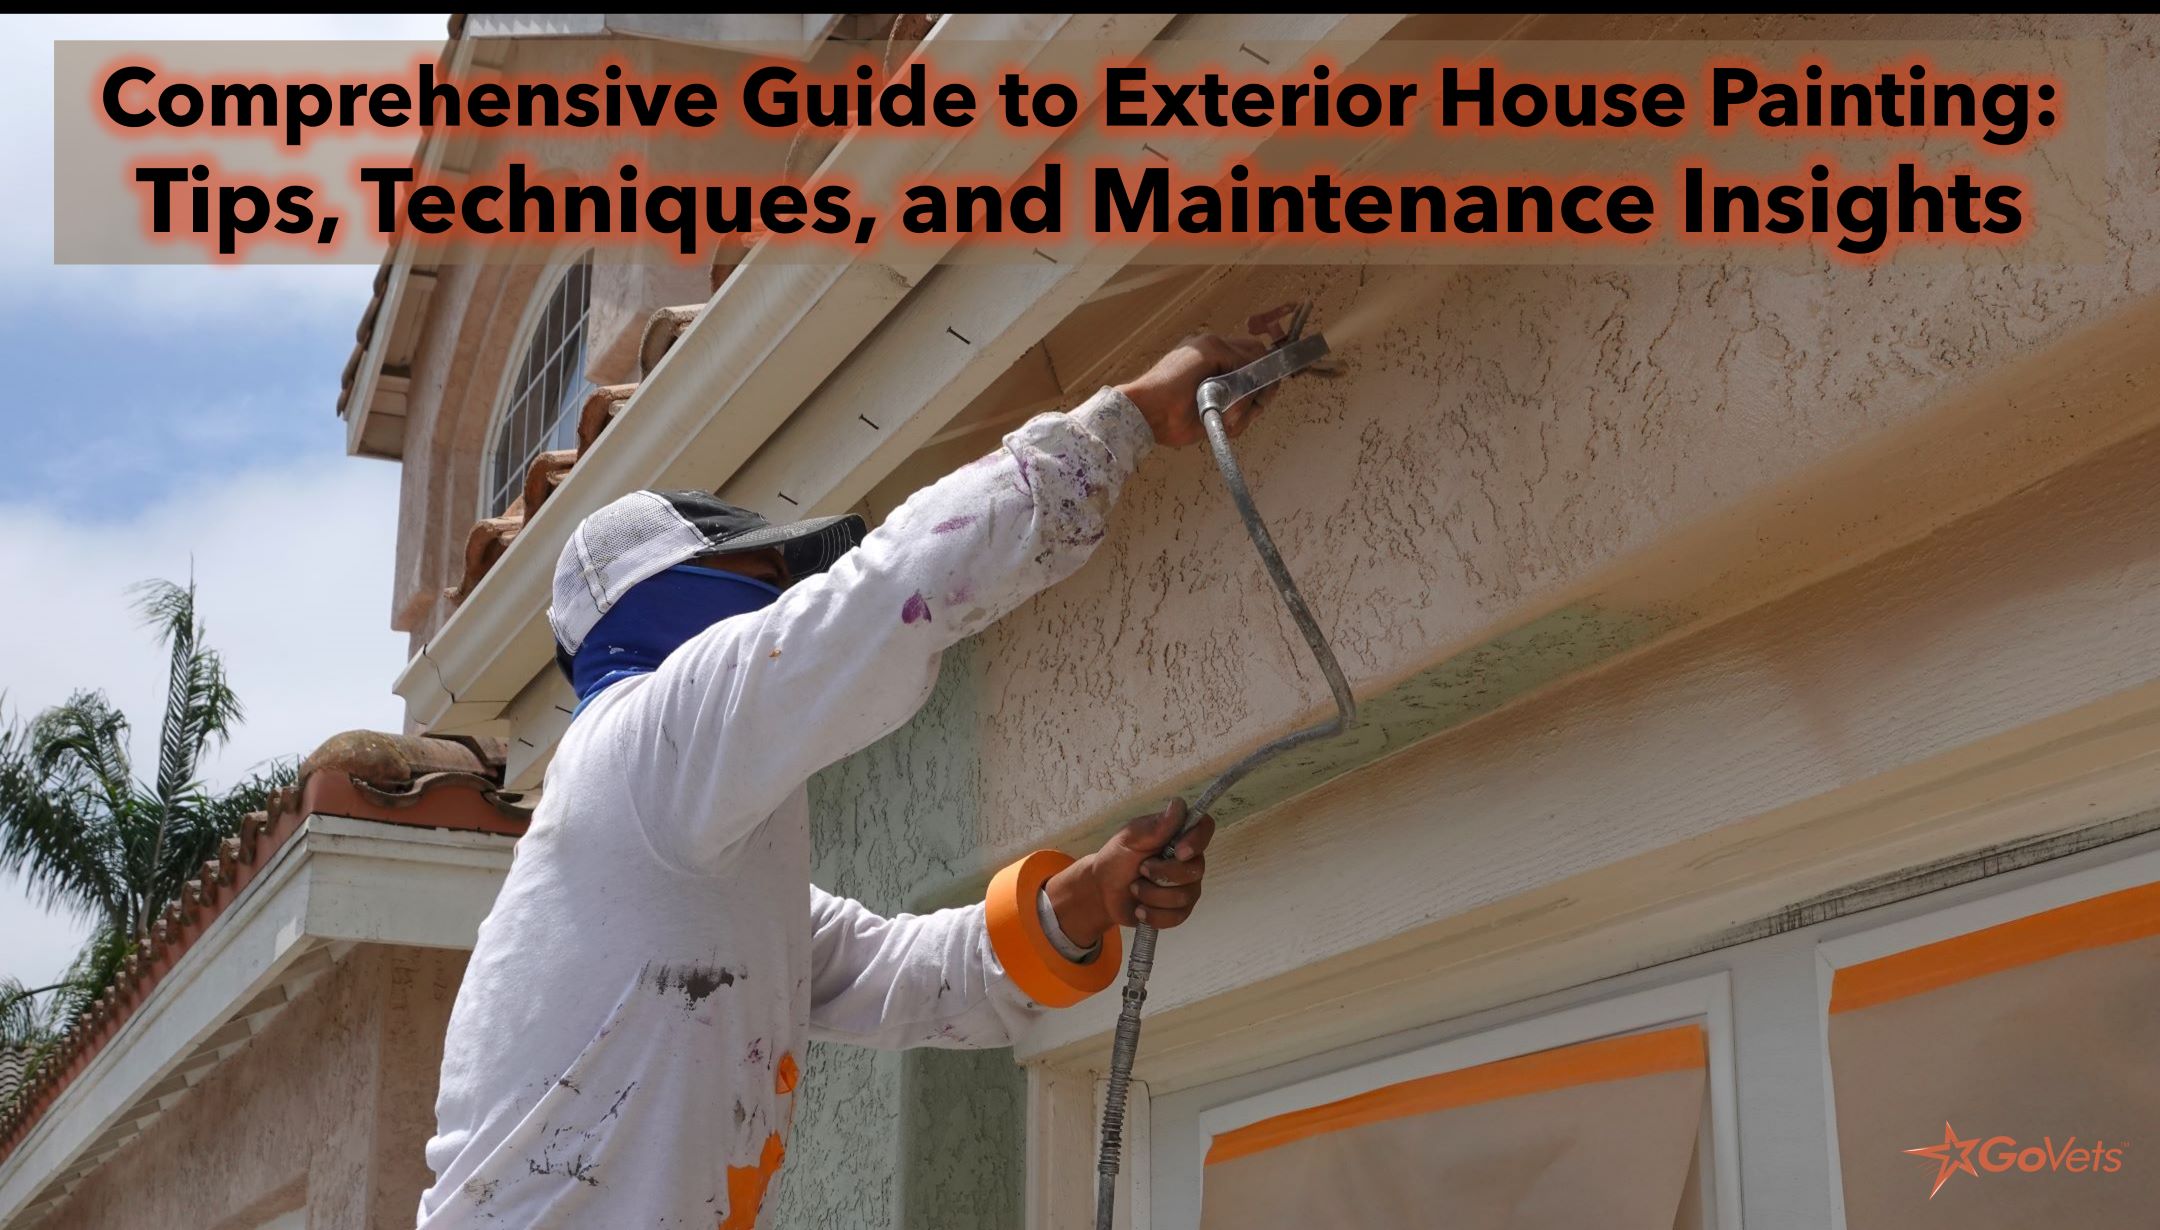 https://www.govets.com/media/magefan_blog/comprehensive-guide-to-exterior-house-painting.jpg